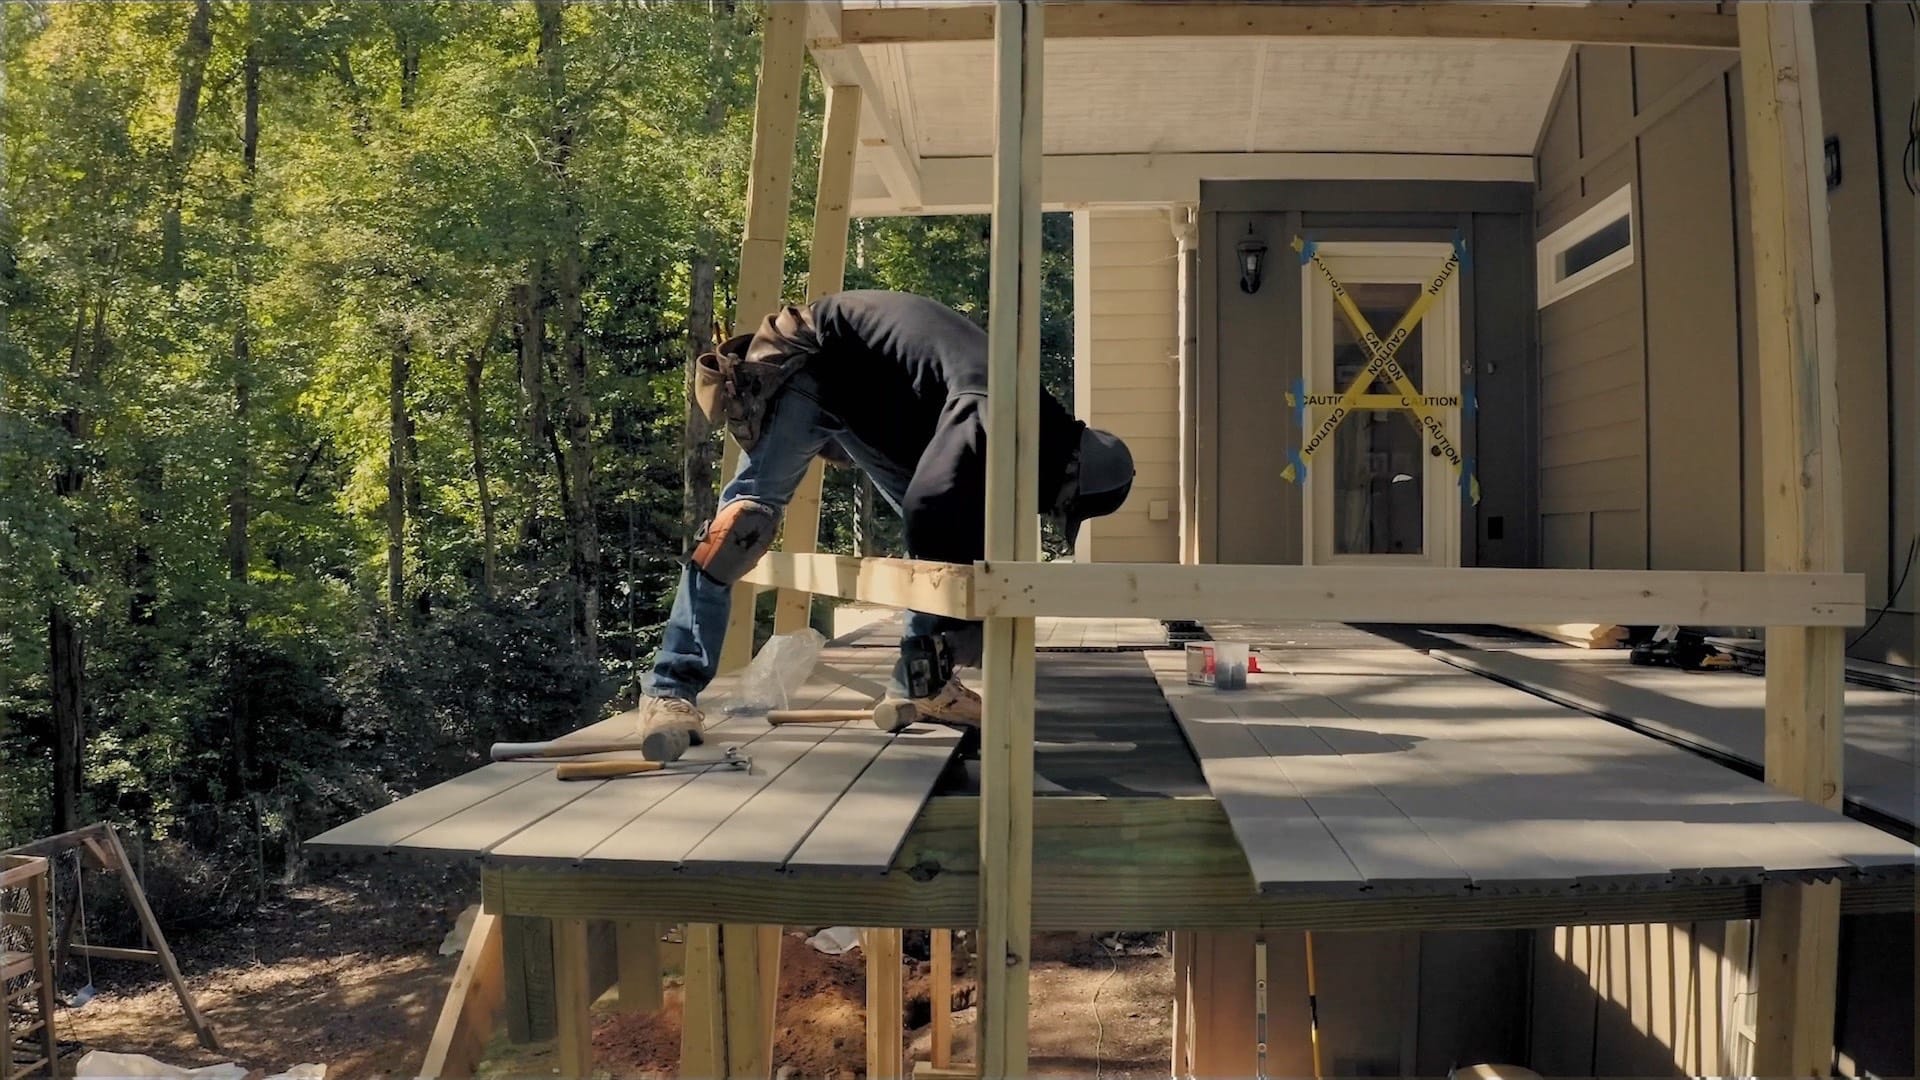 A carpenter works on an elevated patio deck in the backyard.